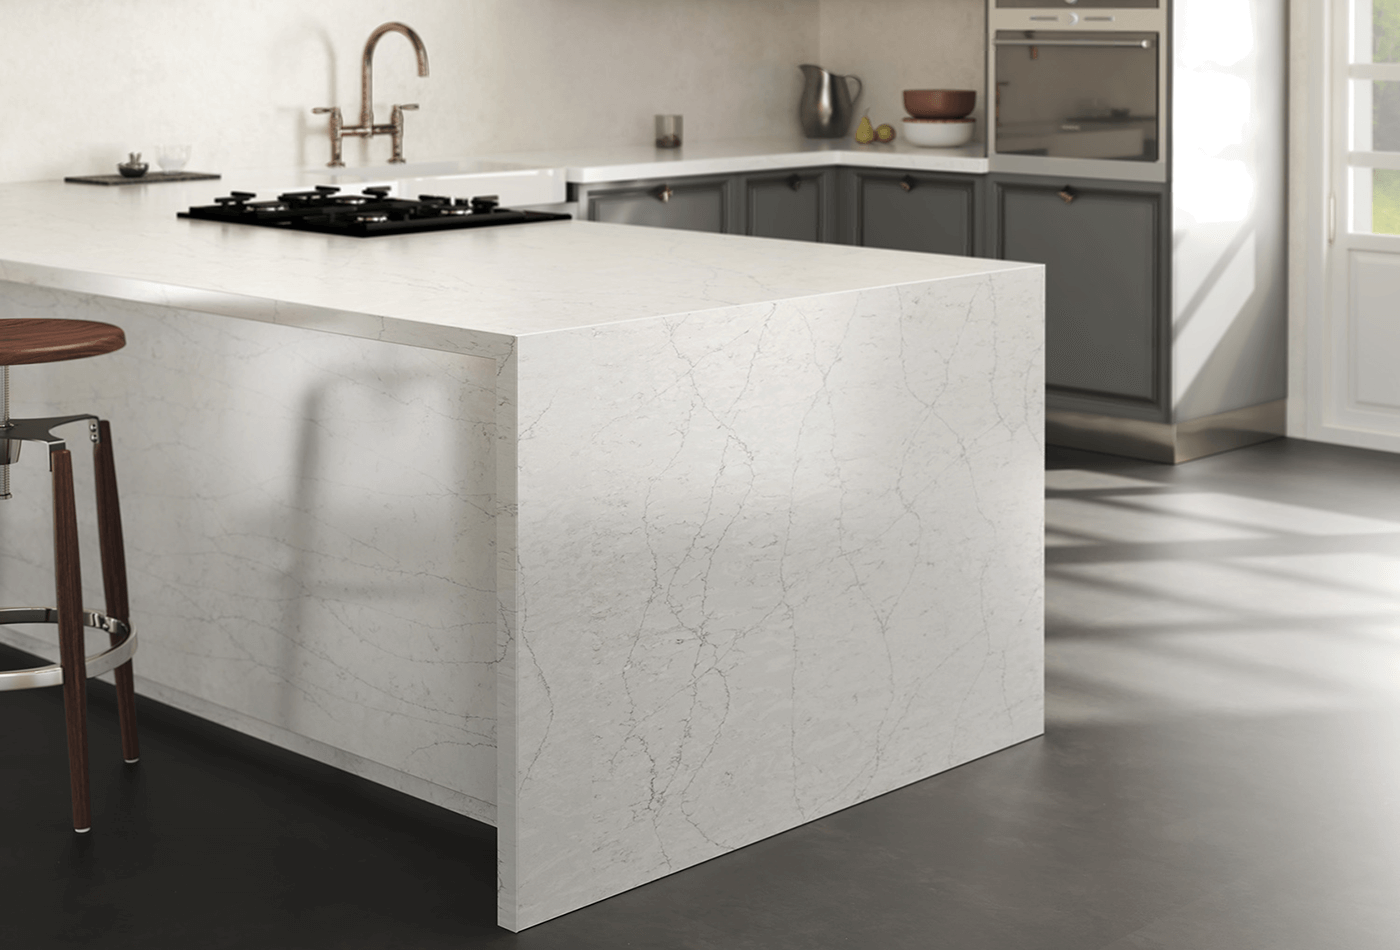 What do you think are the add ons for Pearl Silestone